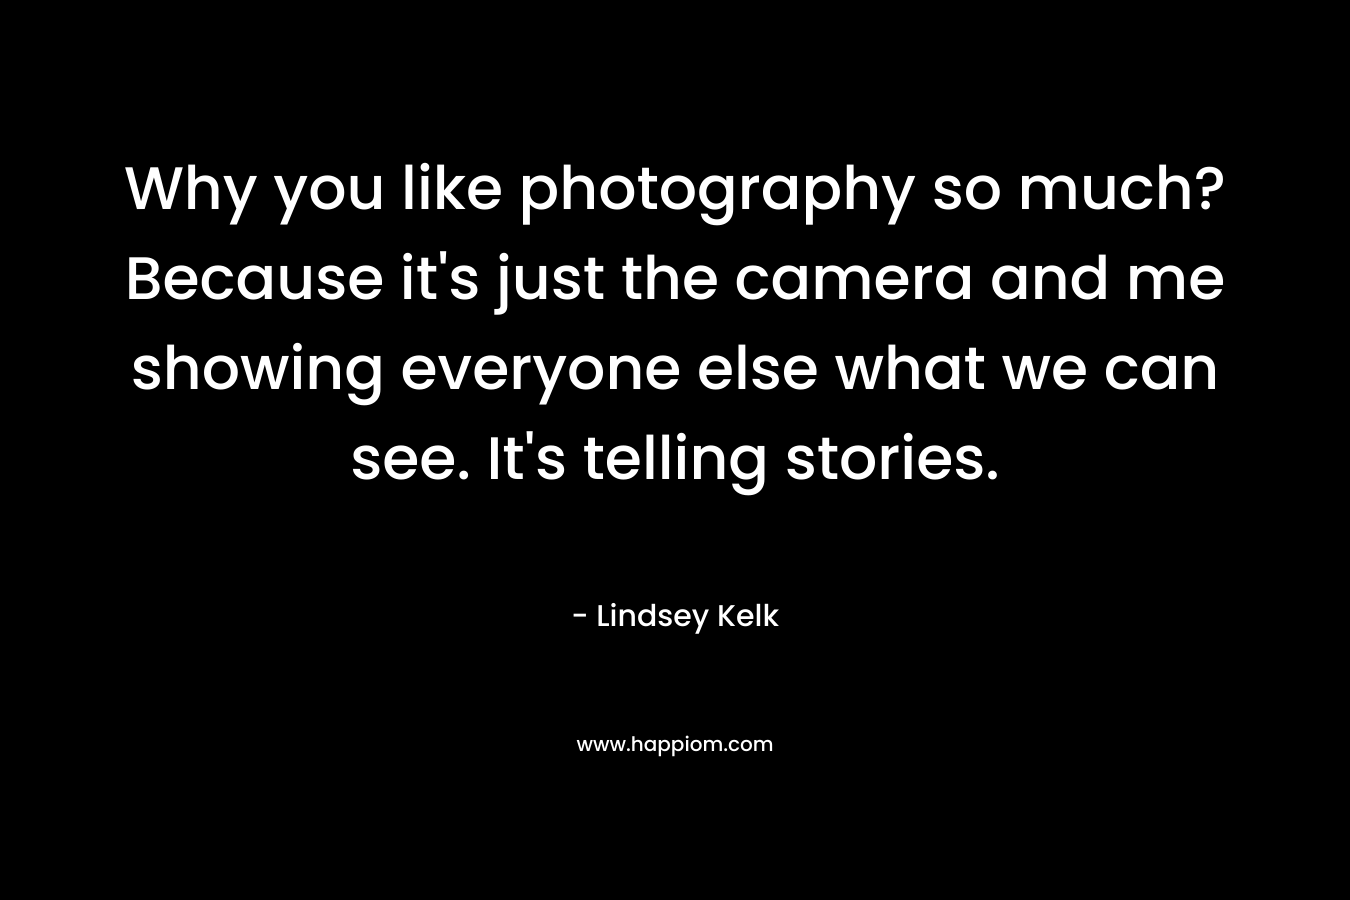 Why you like photography so much? Because it's just the camera and me showing everyone else what we can see. It's telling stories.